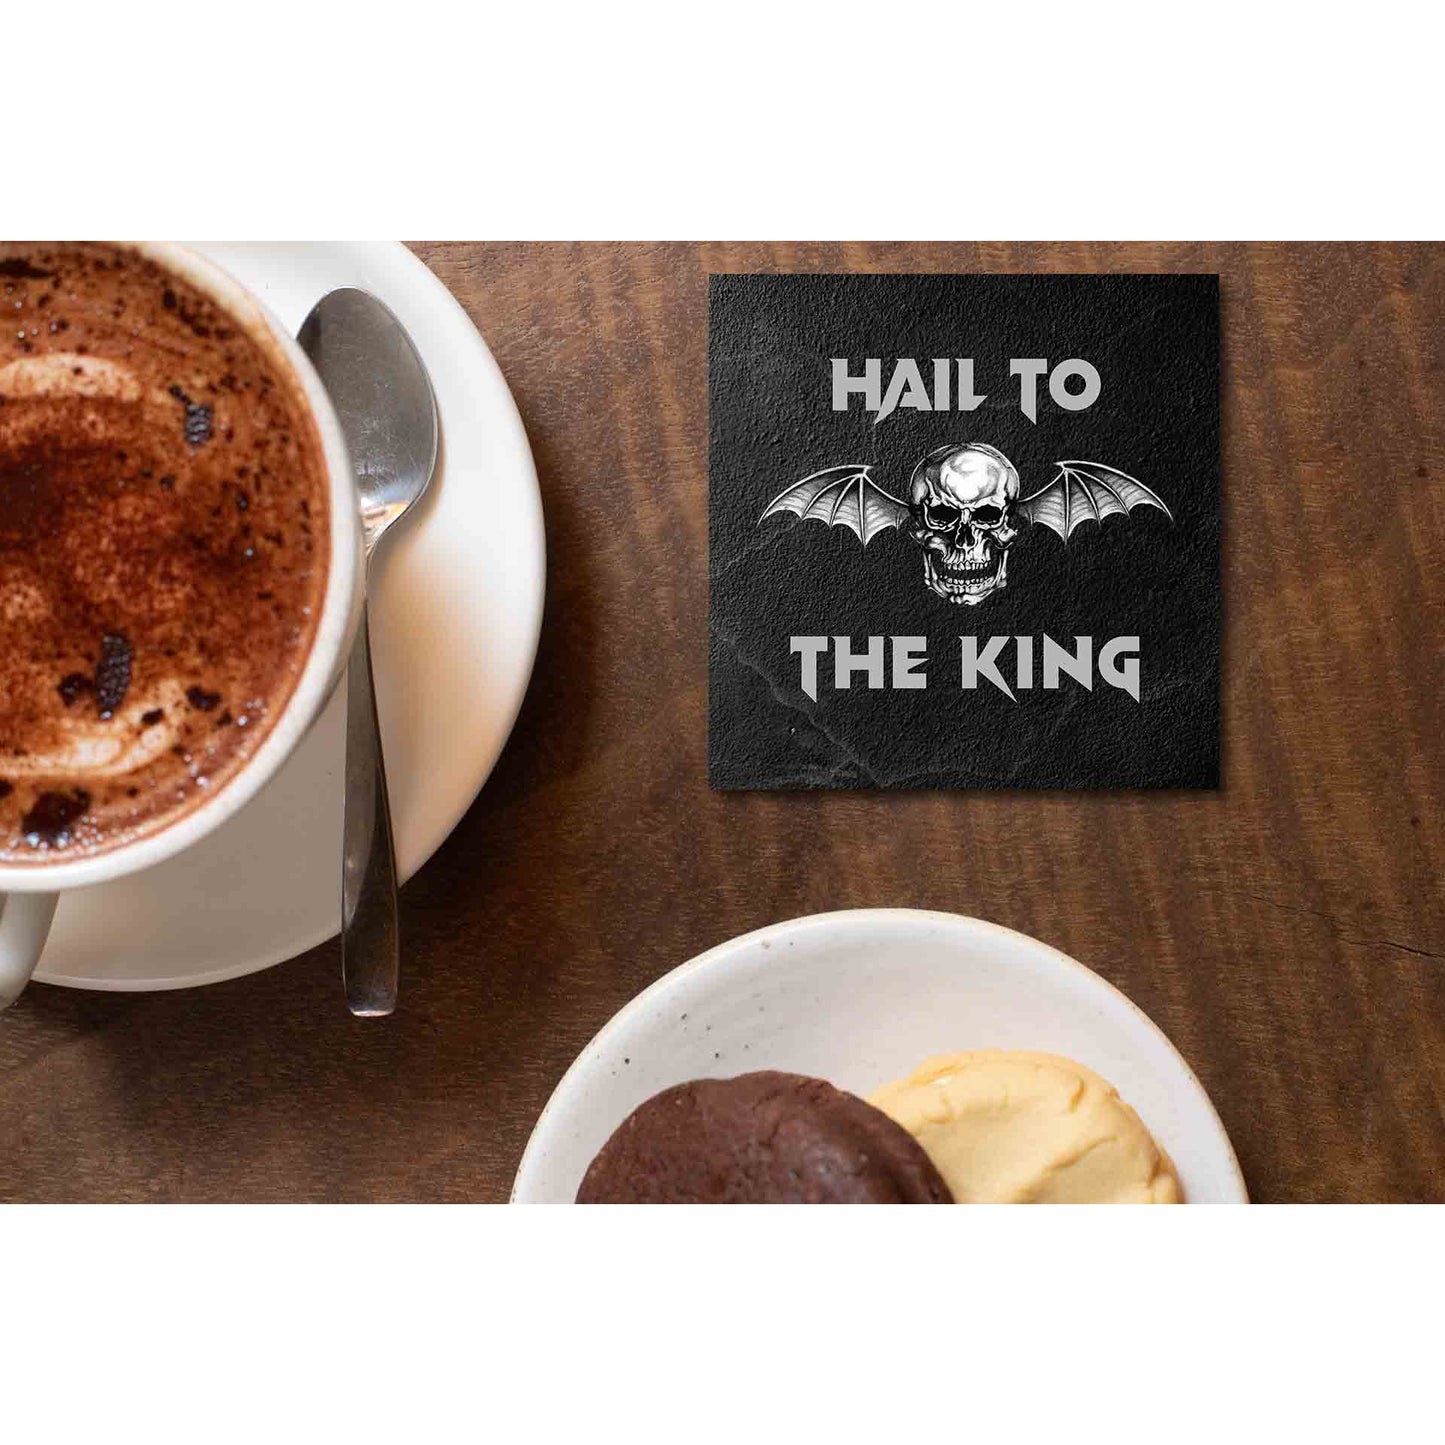 avenged sevenfold hail to the king coasters wooden table cups indian music band buy online india the banyan tee tbt men women girls boys unisex